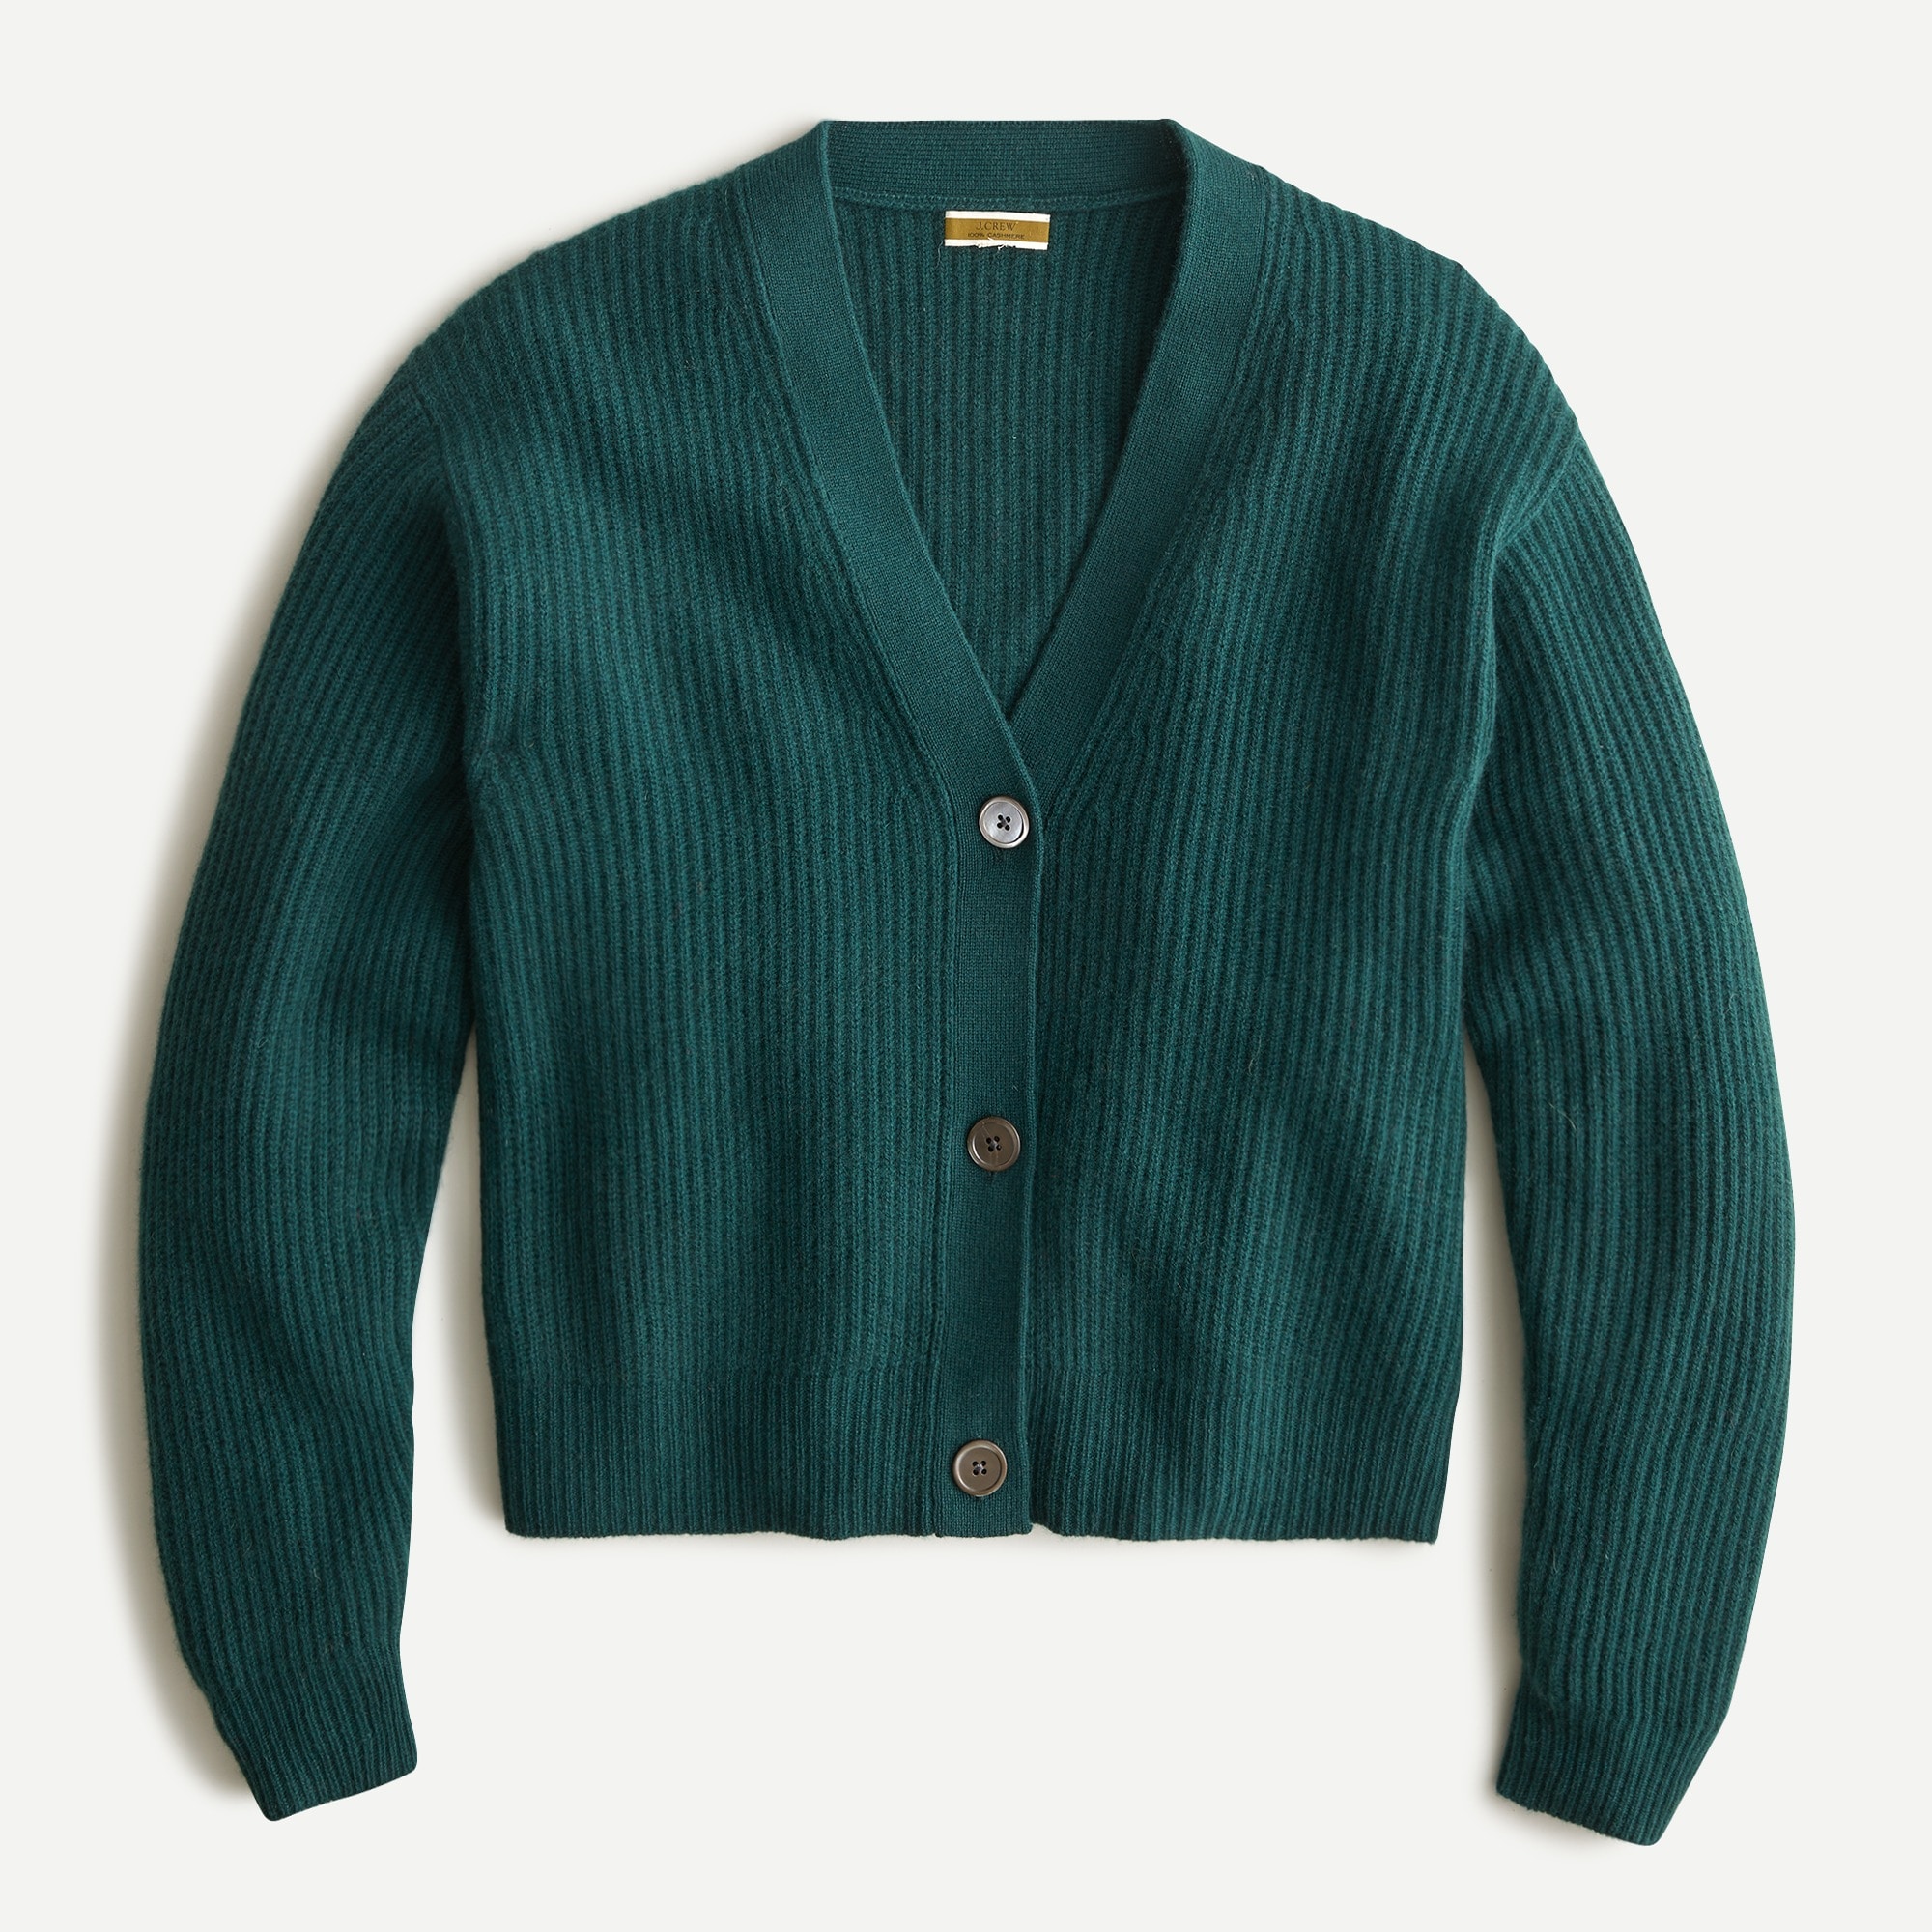 J.Crew: Ribbed Cashmere V-neck Cardigan Sweater For Women